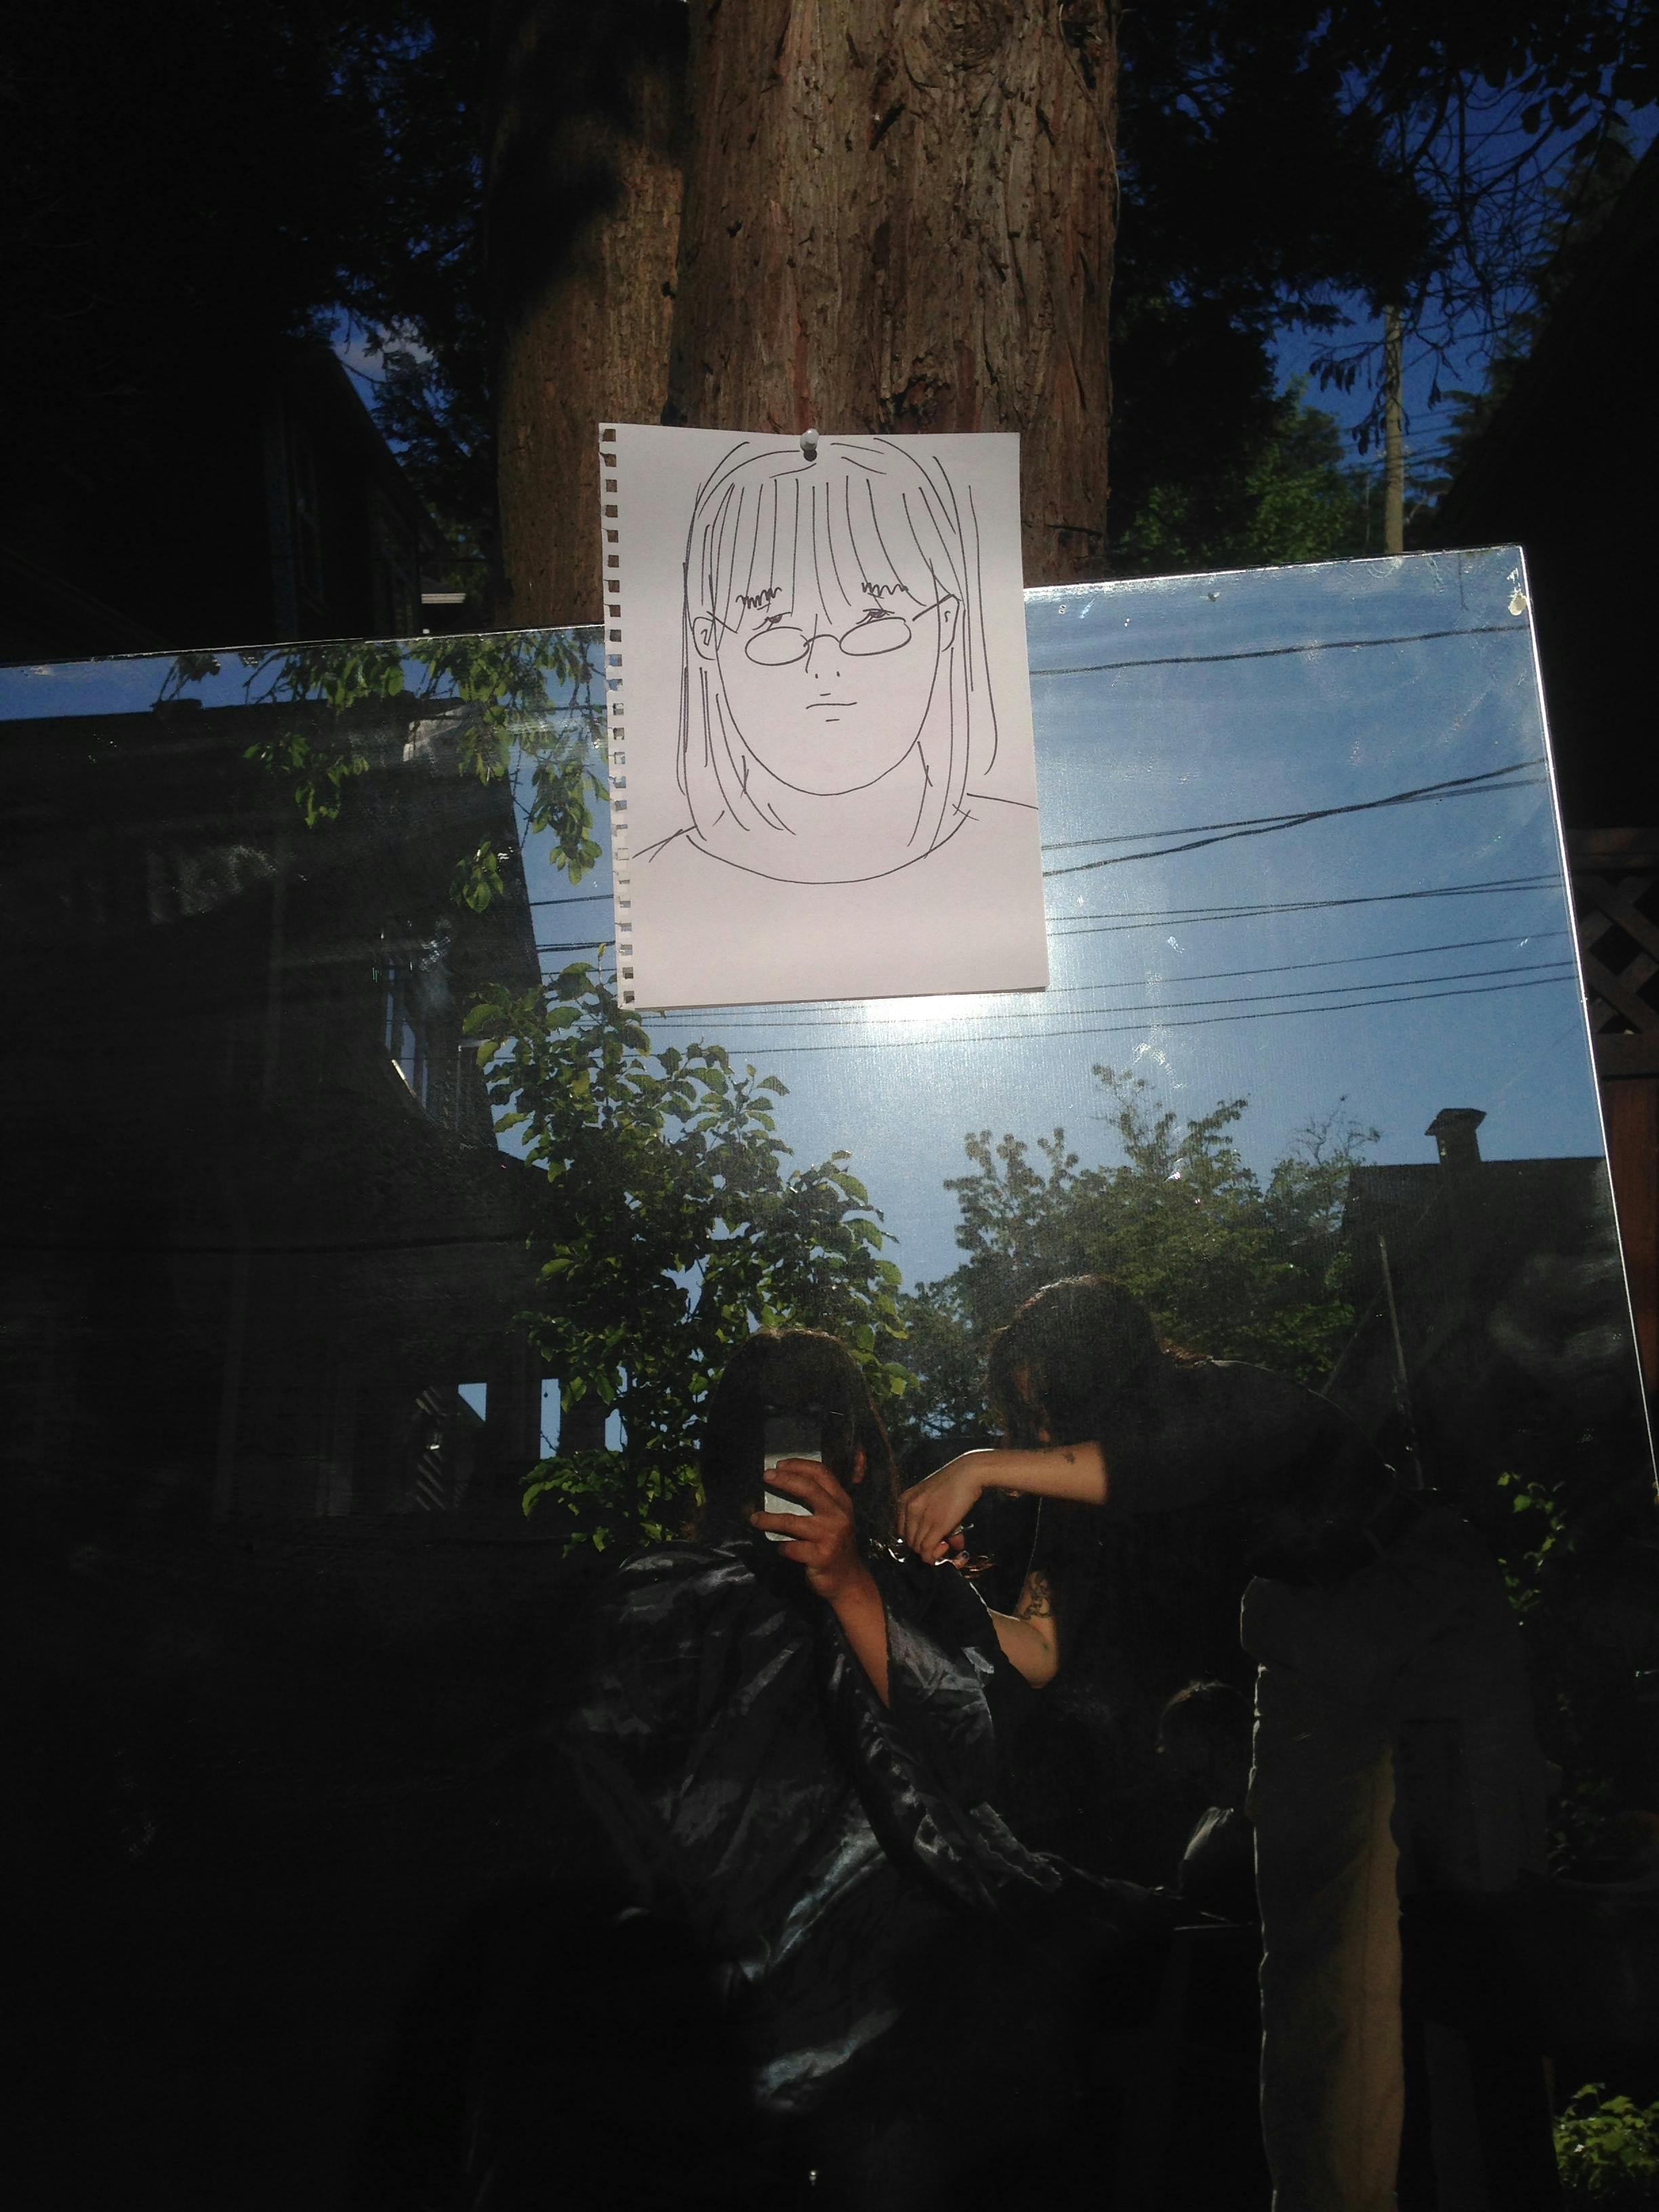 A photograph of a large mirror placed outside. A drawing of a person's face is attached to the top of the mirror. The reflection on the mirror shows people getting haircuts. 